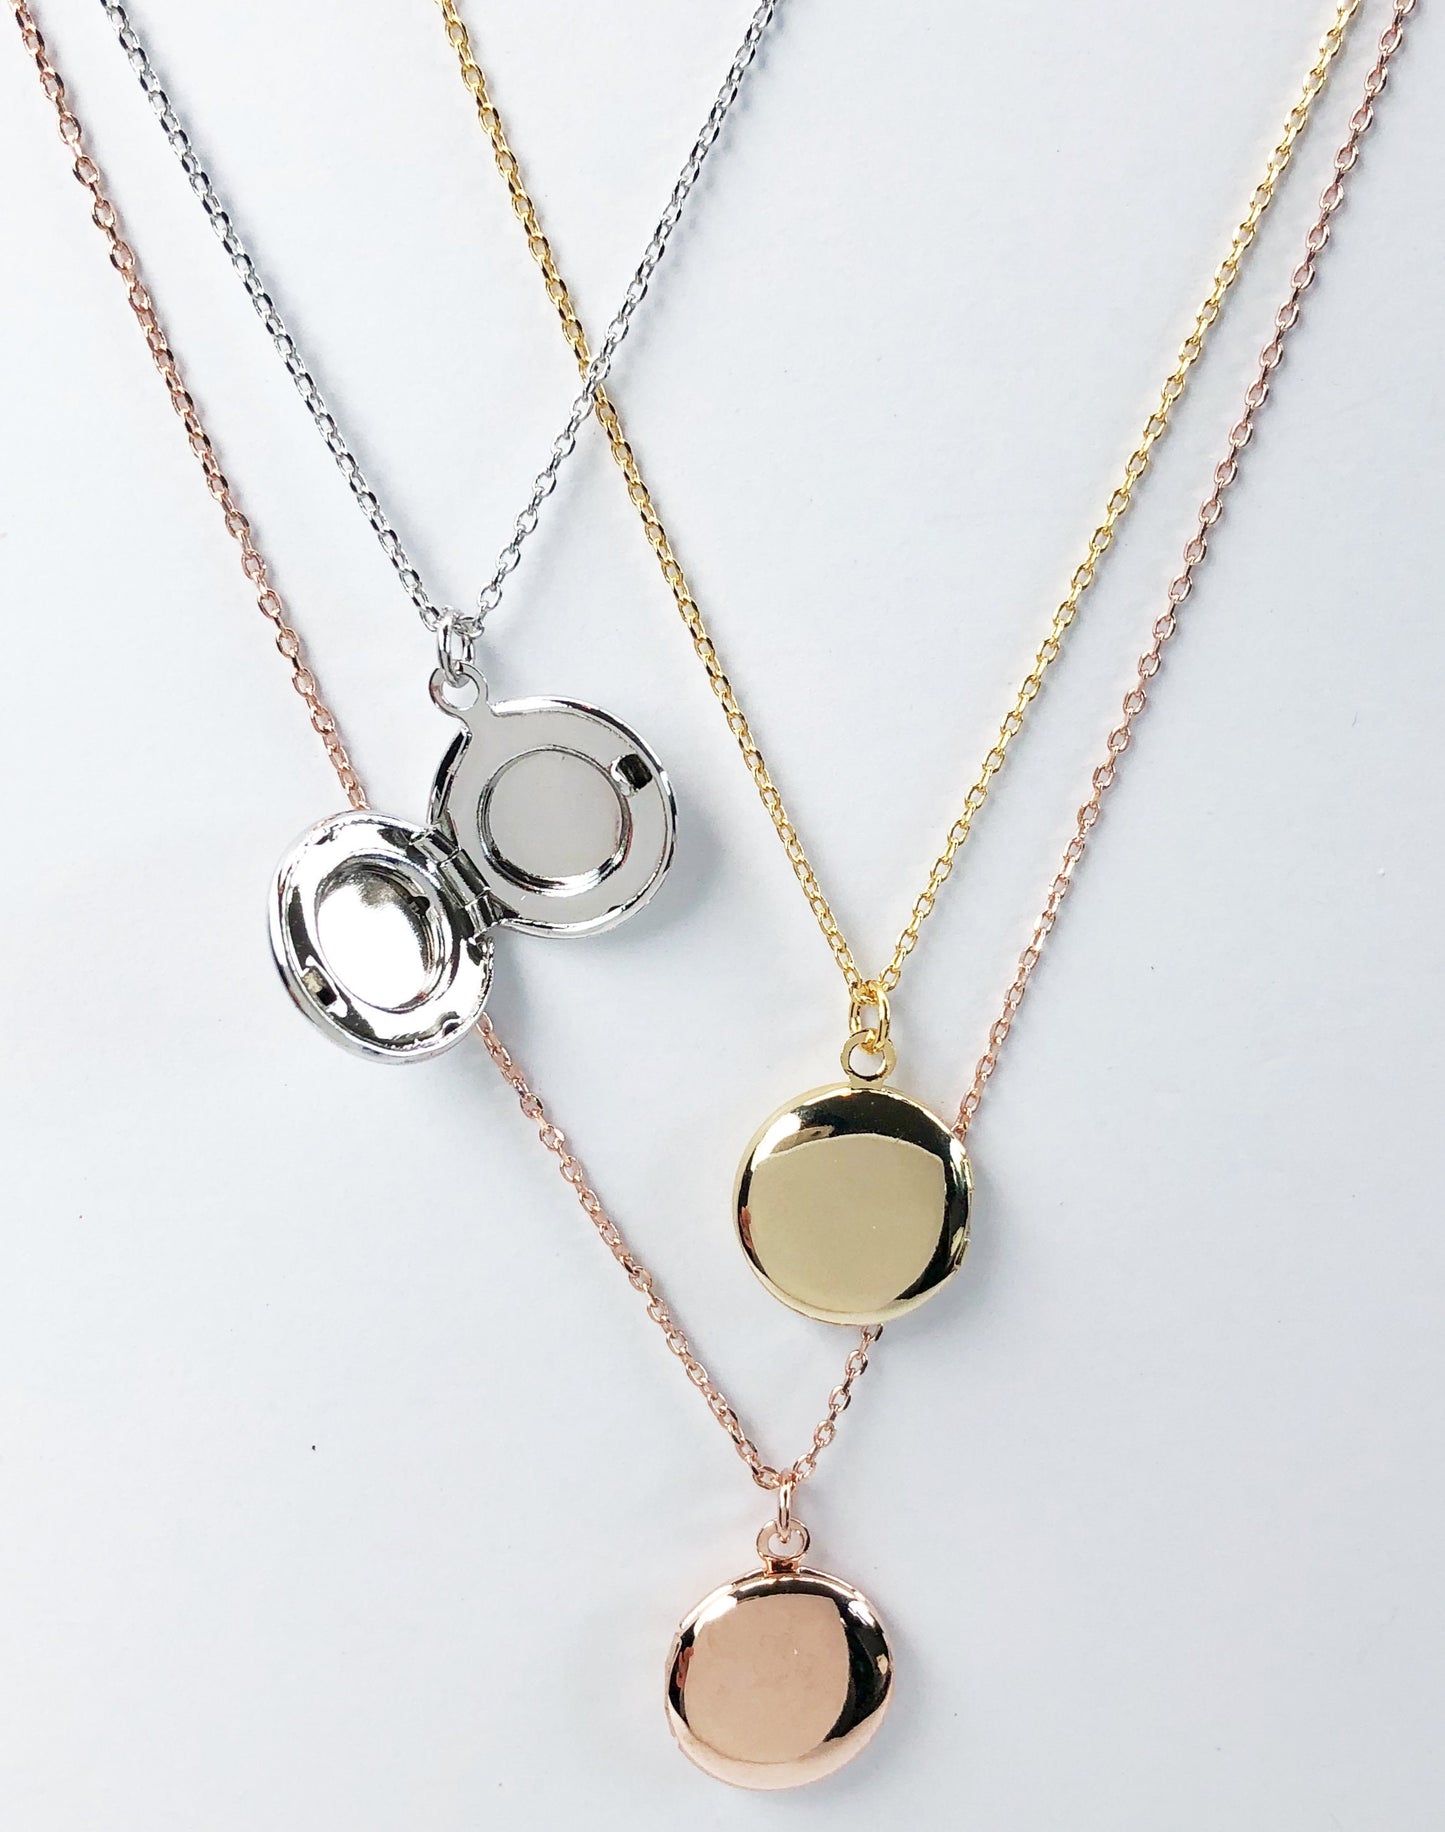 Locket necklace, Round Locket necklace, birthday gift, layering necklace, dainty jewelry, bridesmaid gifts, rose gold, gold, silver, locket